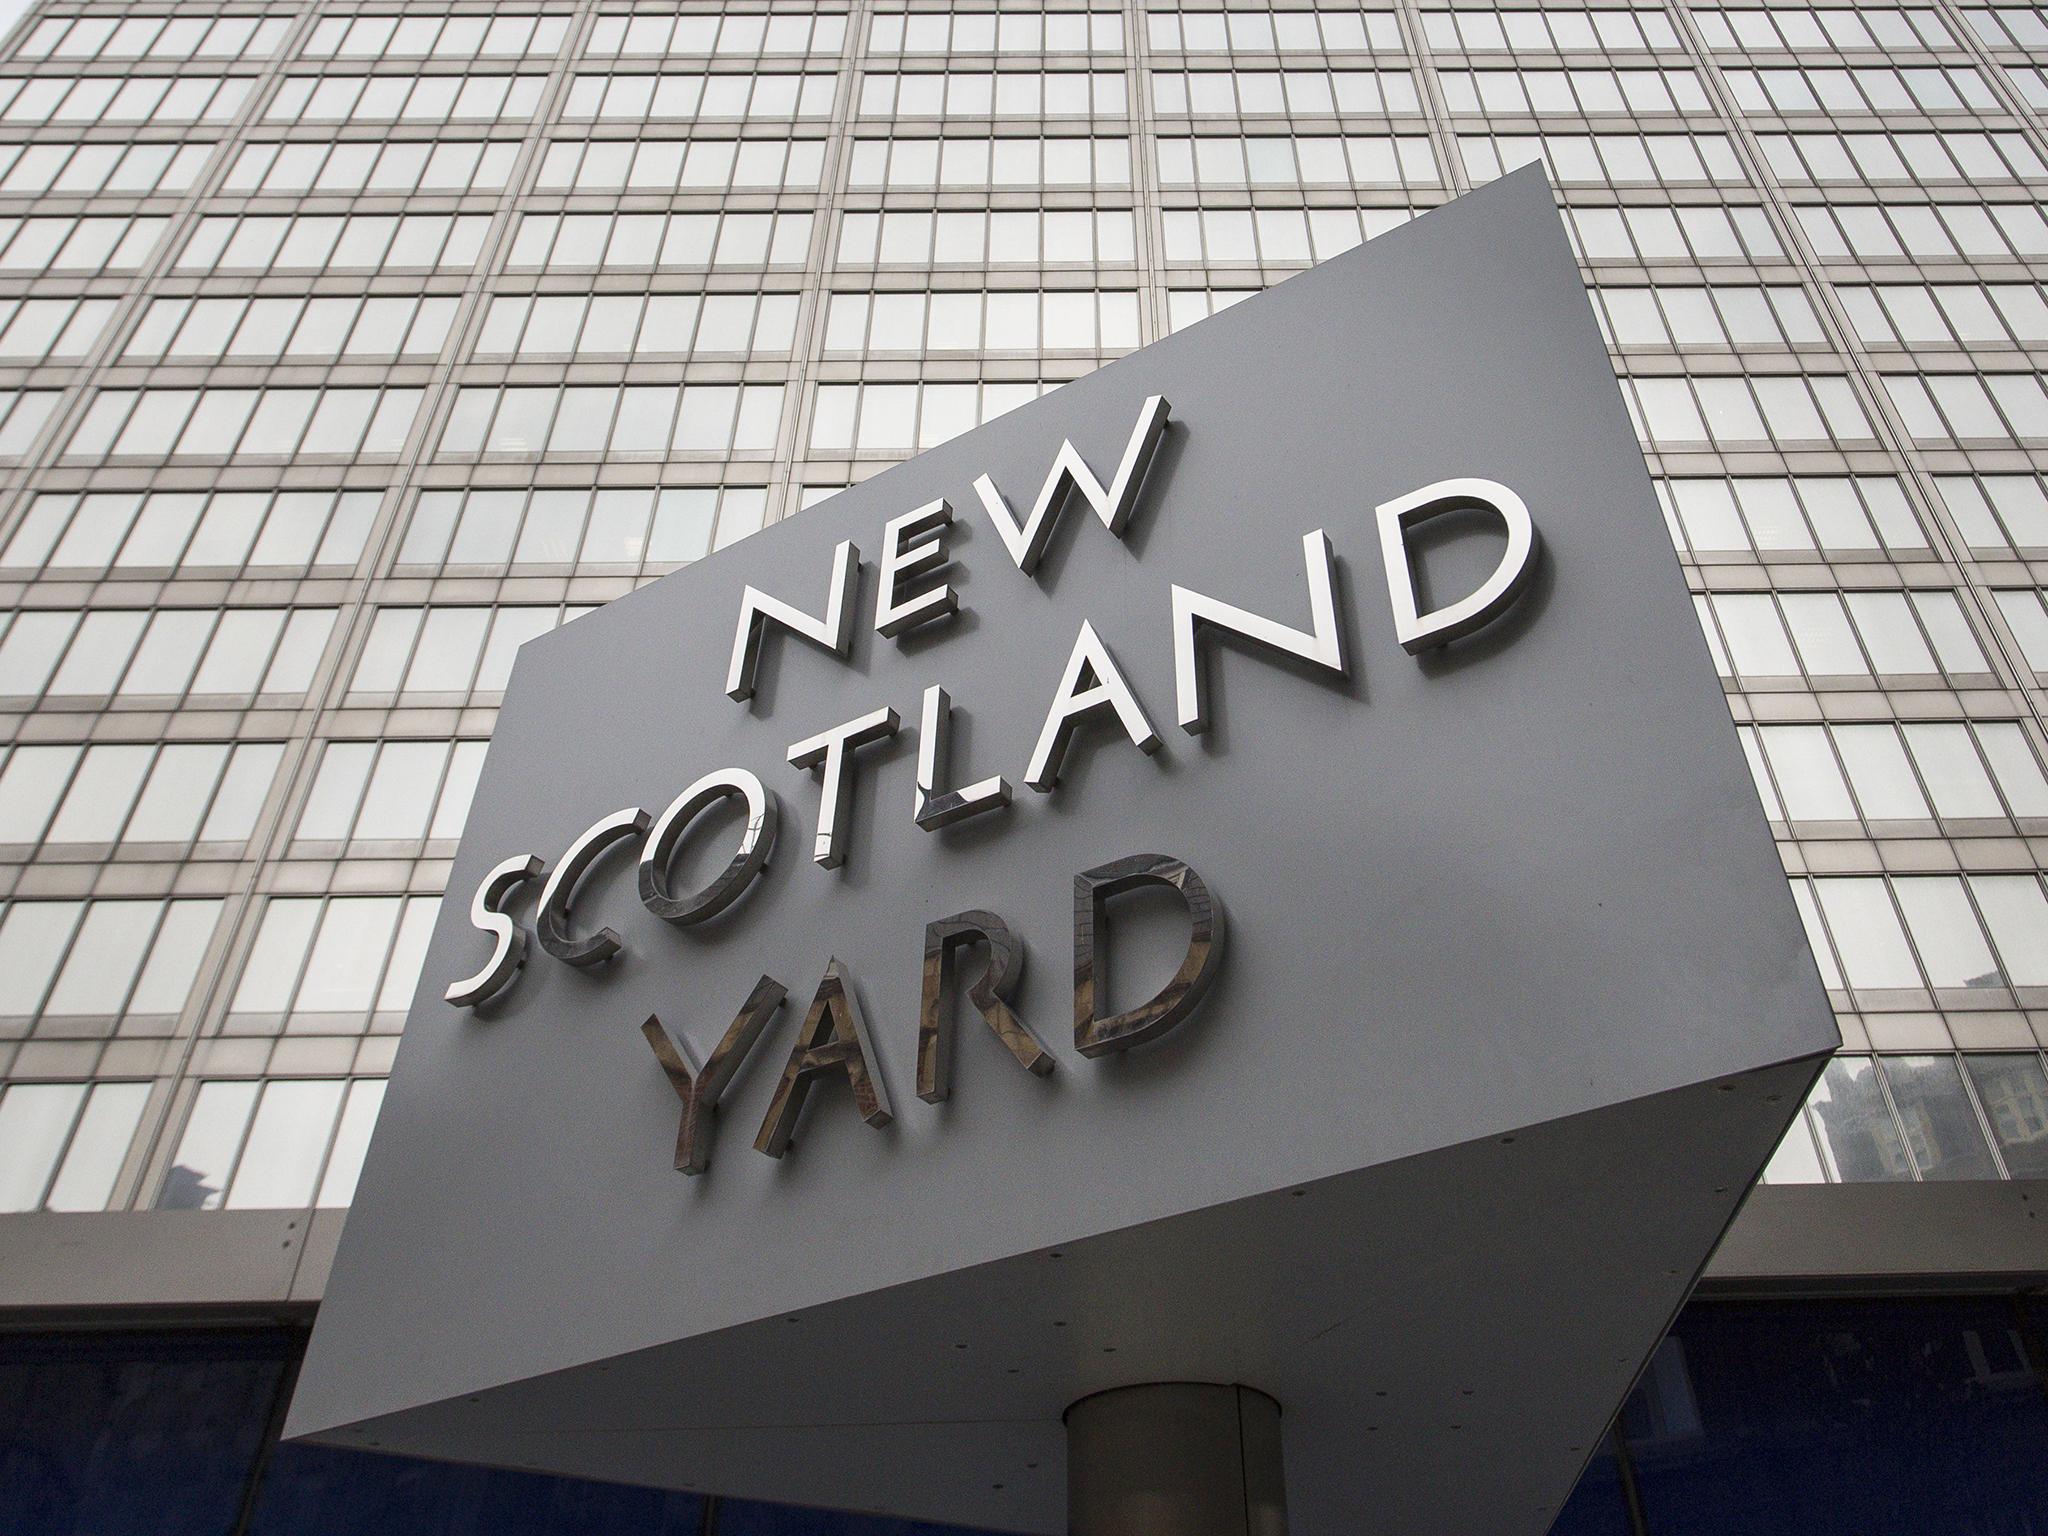 A Scotland Yard spokeman said the force is aware of concerns raised by the former sergeant